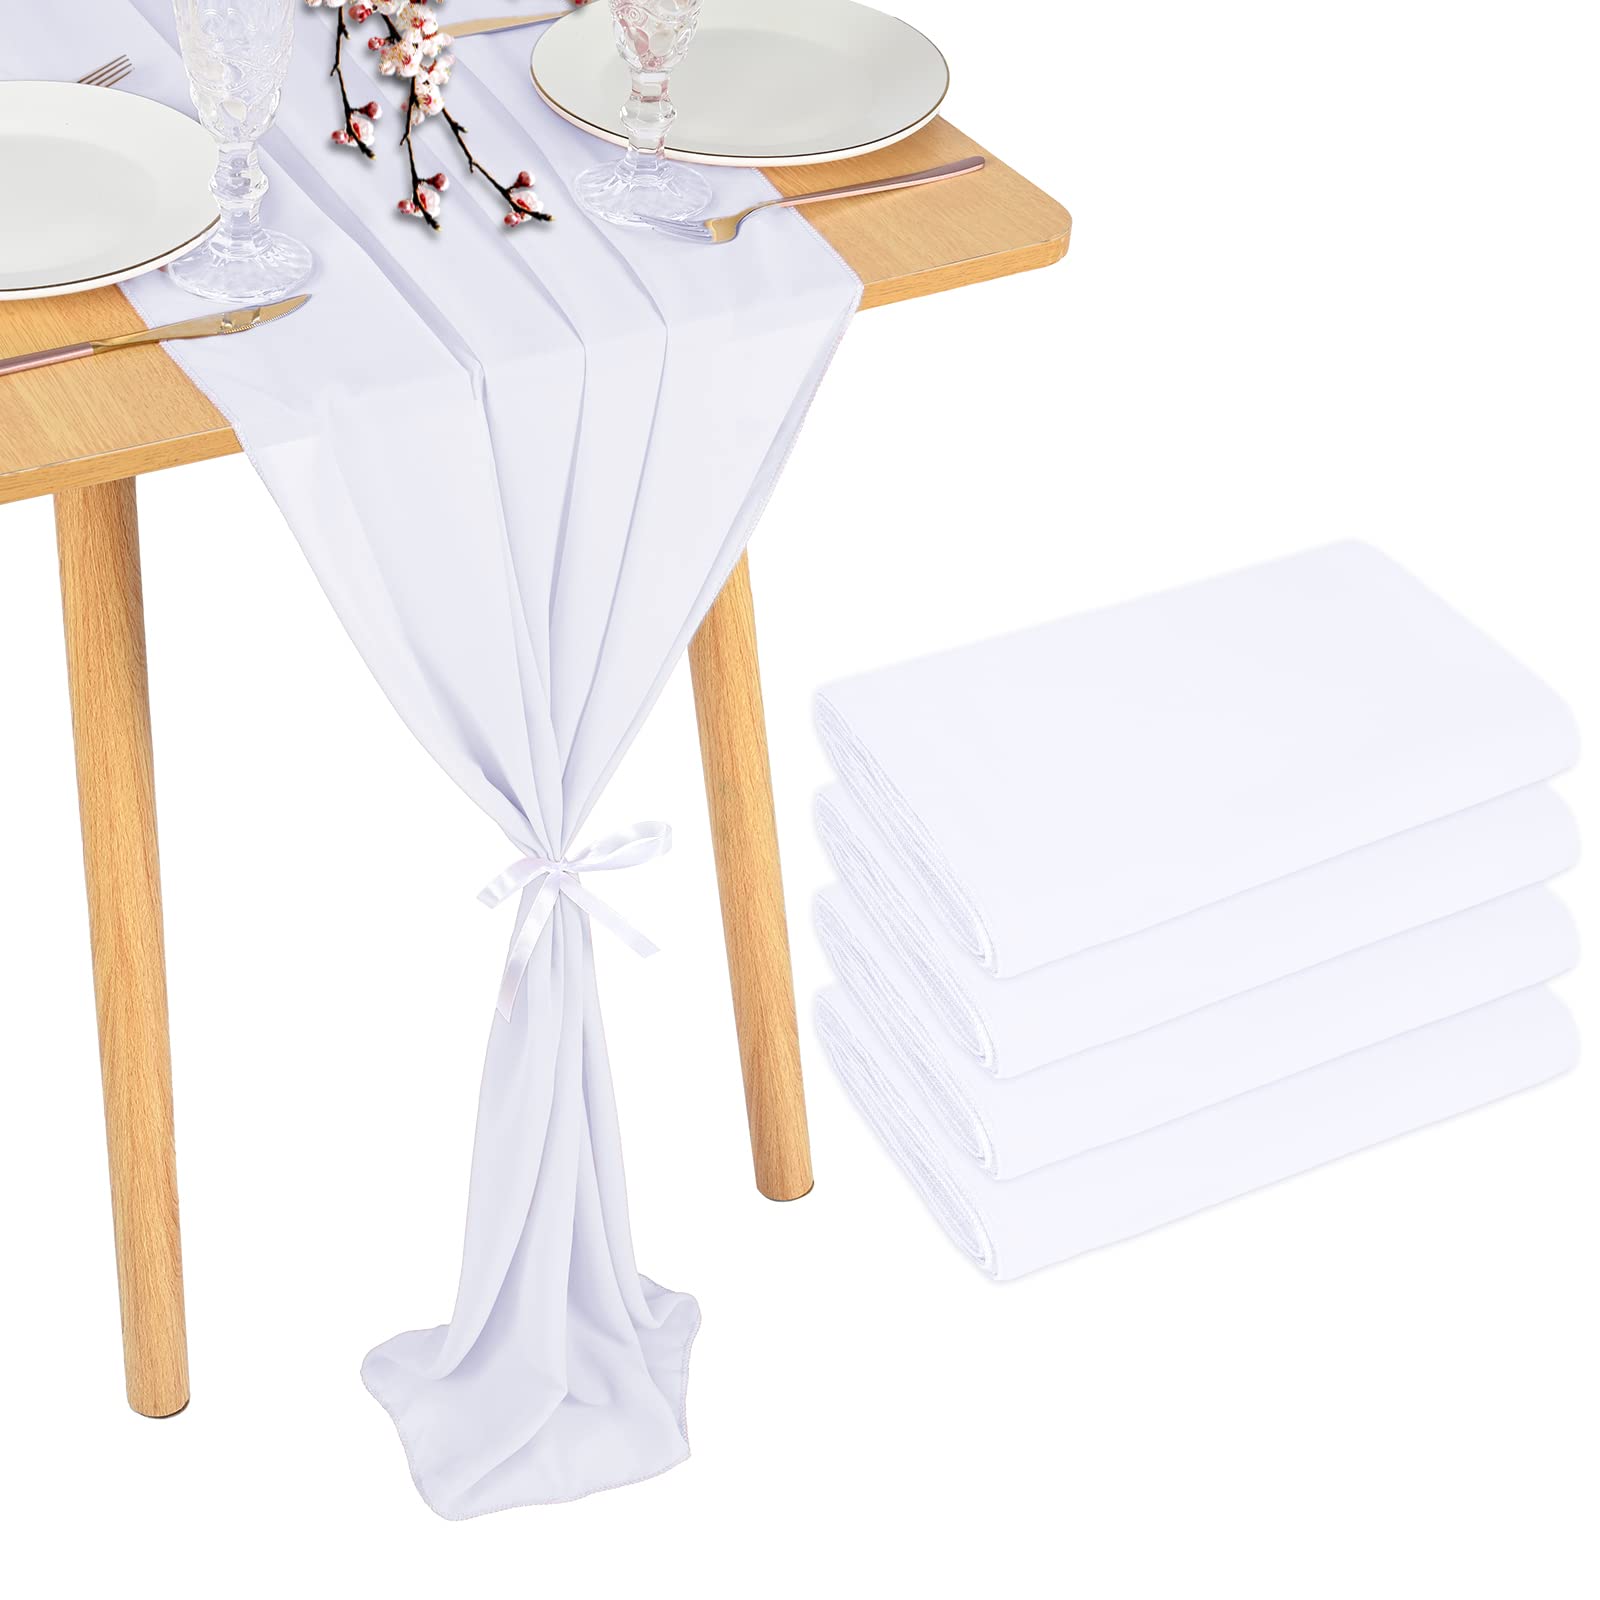 Pesonlook 4Pcs White Chiffon Table Runner 28x120Inches Wedding Table Runner 10FT Table Runners Birthday Party Table Runner Decorations for Holiday,Baby Shower Decorations,Wedding Table Runners Decor